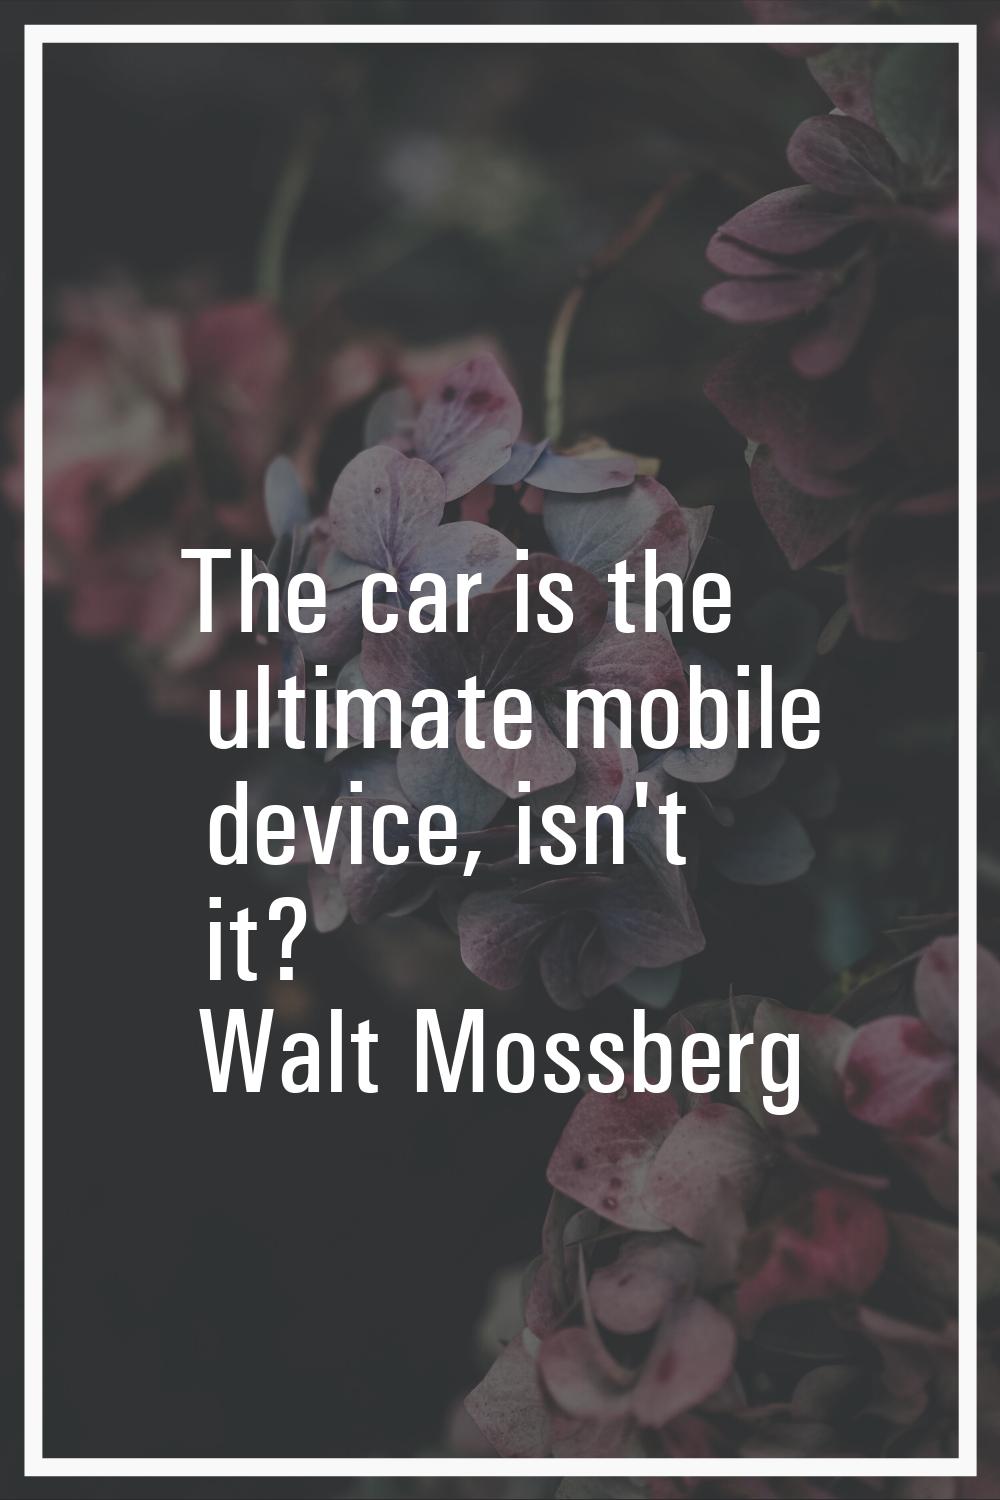 The car is the ultimate mobile device, isn't it?